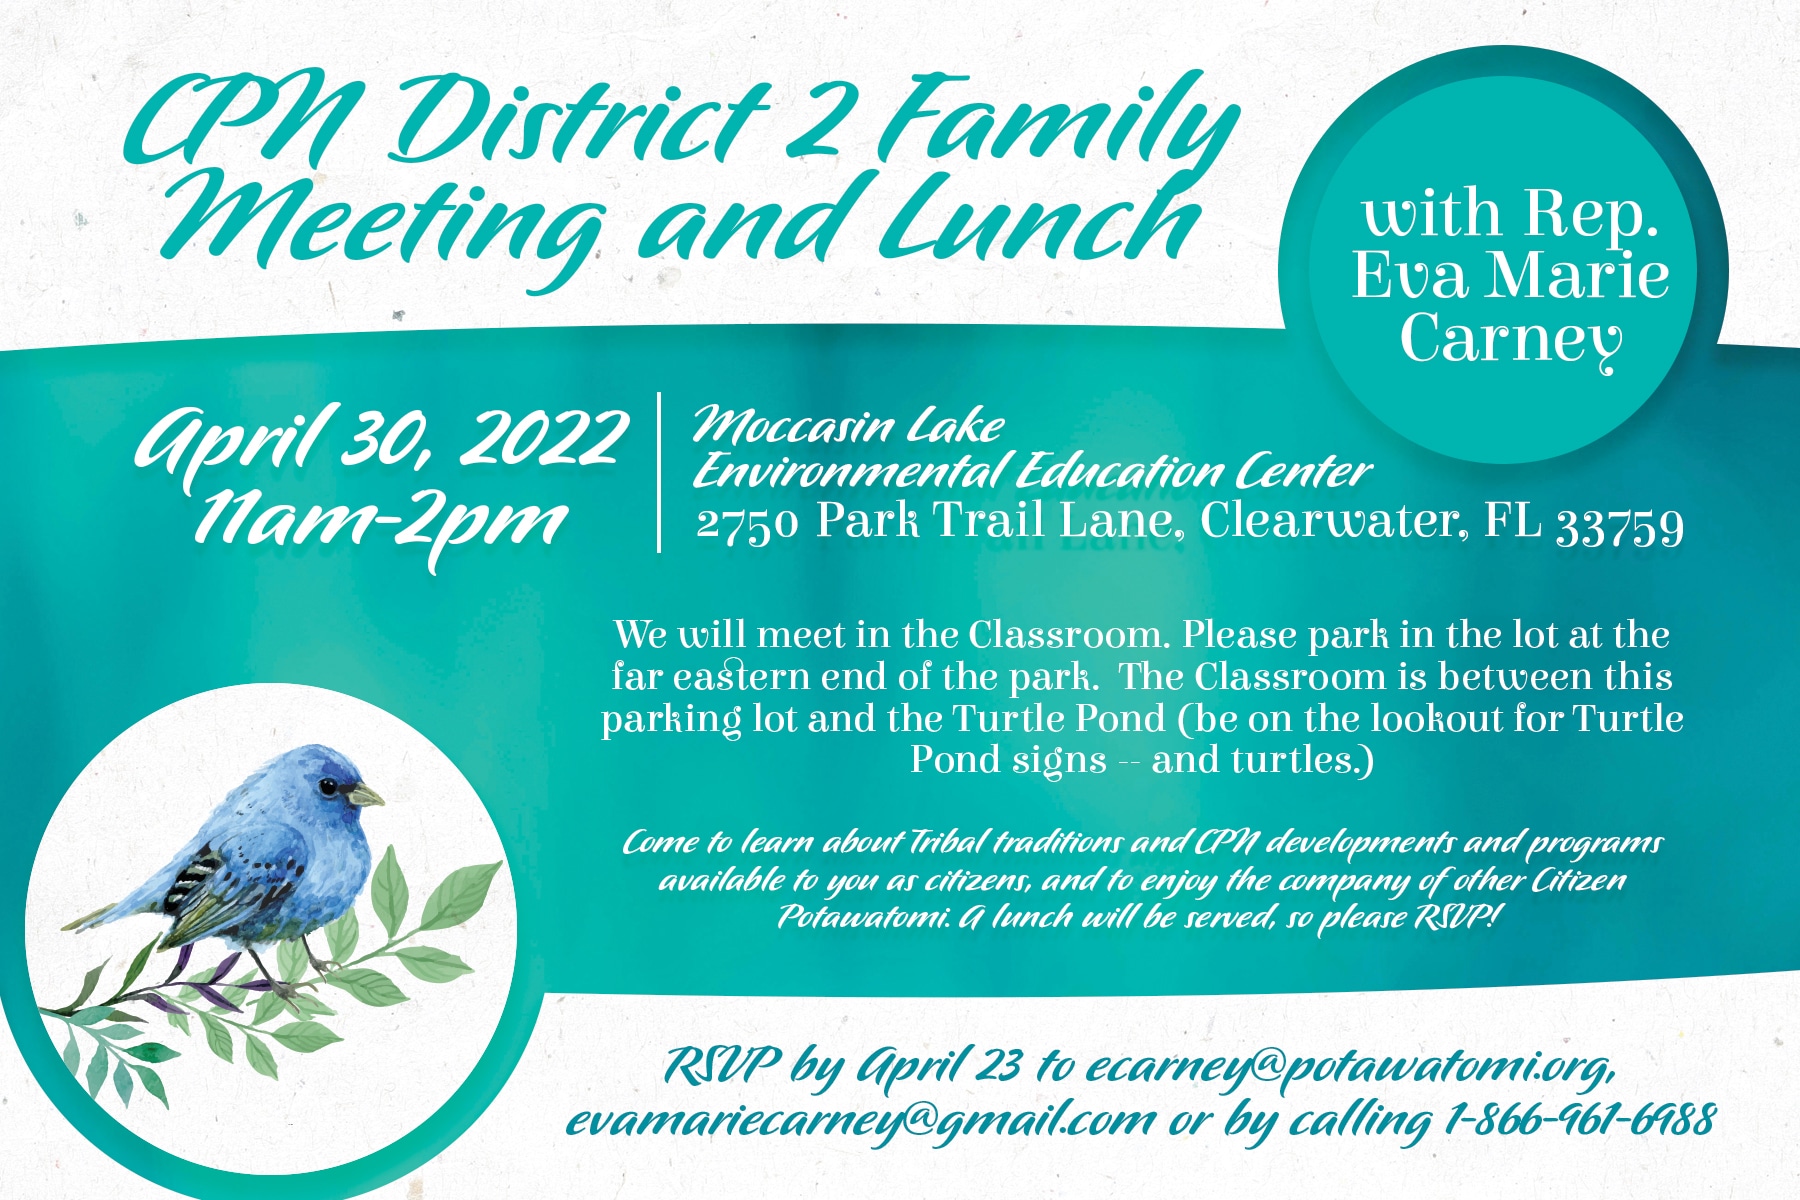 A teal banner across the center of a white flyer invites you to a CPN District 2 meeting and lunch at the Moccasin Lake Environmental Education Center in Clearwater, FL on April 30, 2022 from 11am-2pm. District 2 Rep. Eva Marie Carney invites you to come learn about Tribal traditions, CPN developments and programs available to CPN citizens as well as enjoy the company of fellow Citizen Potawatomi. RSVP is required by April 23, 2022 to ecarney@potawatomi.org or 1-866-961-6988.